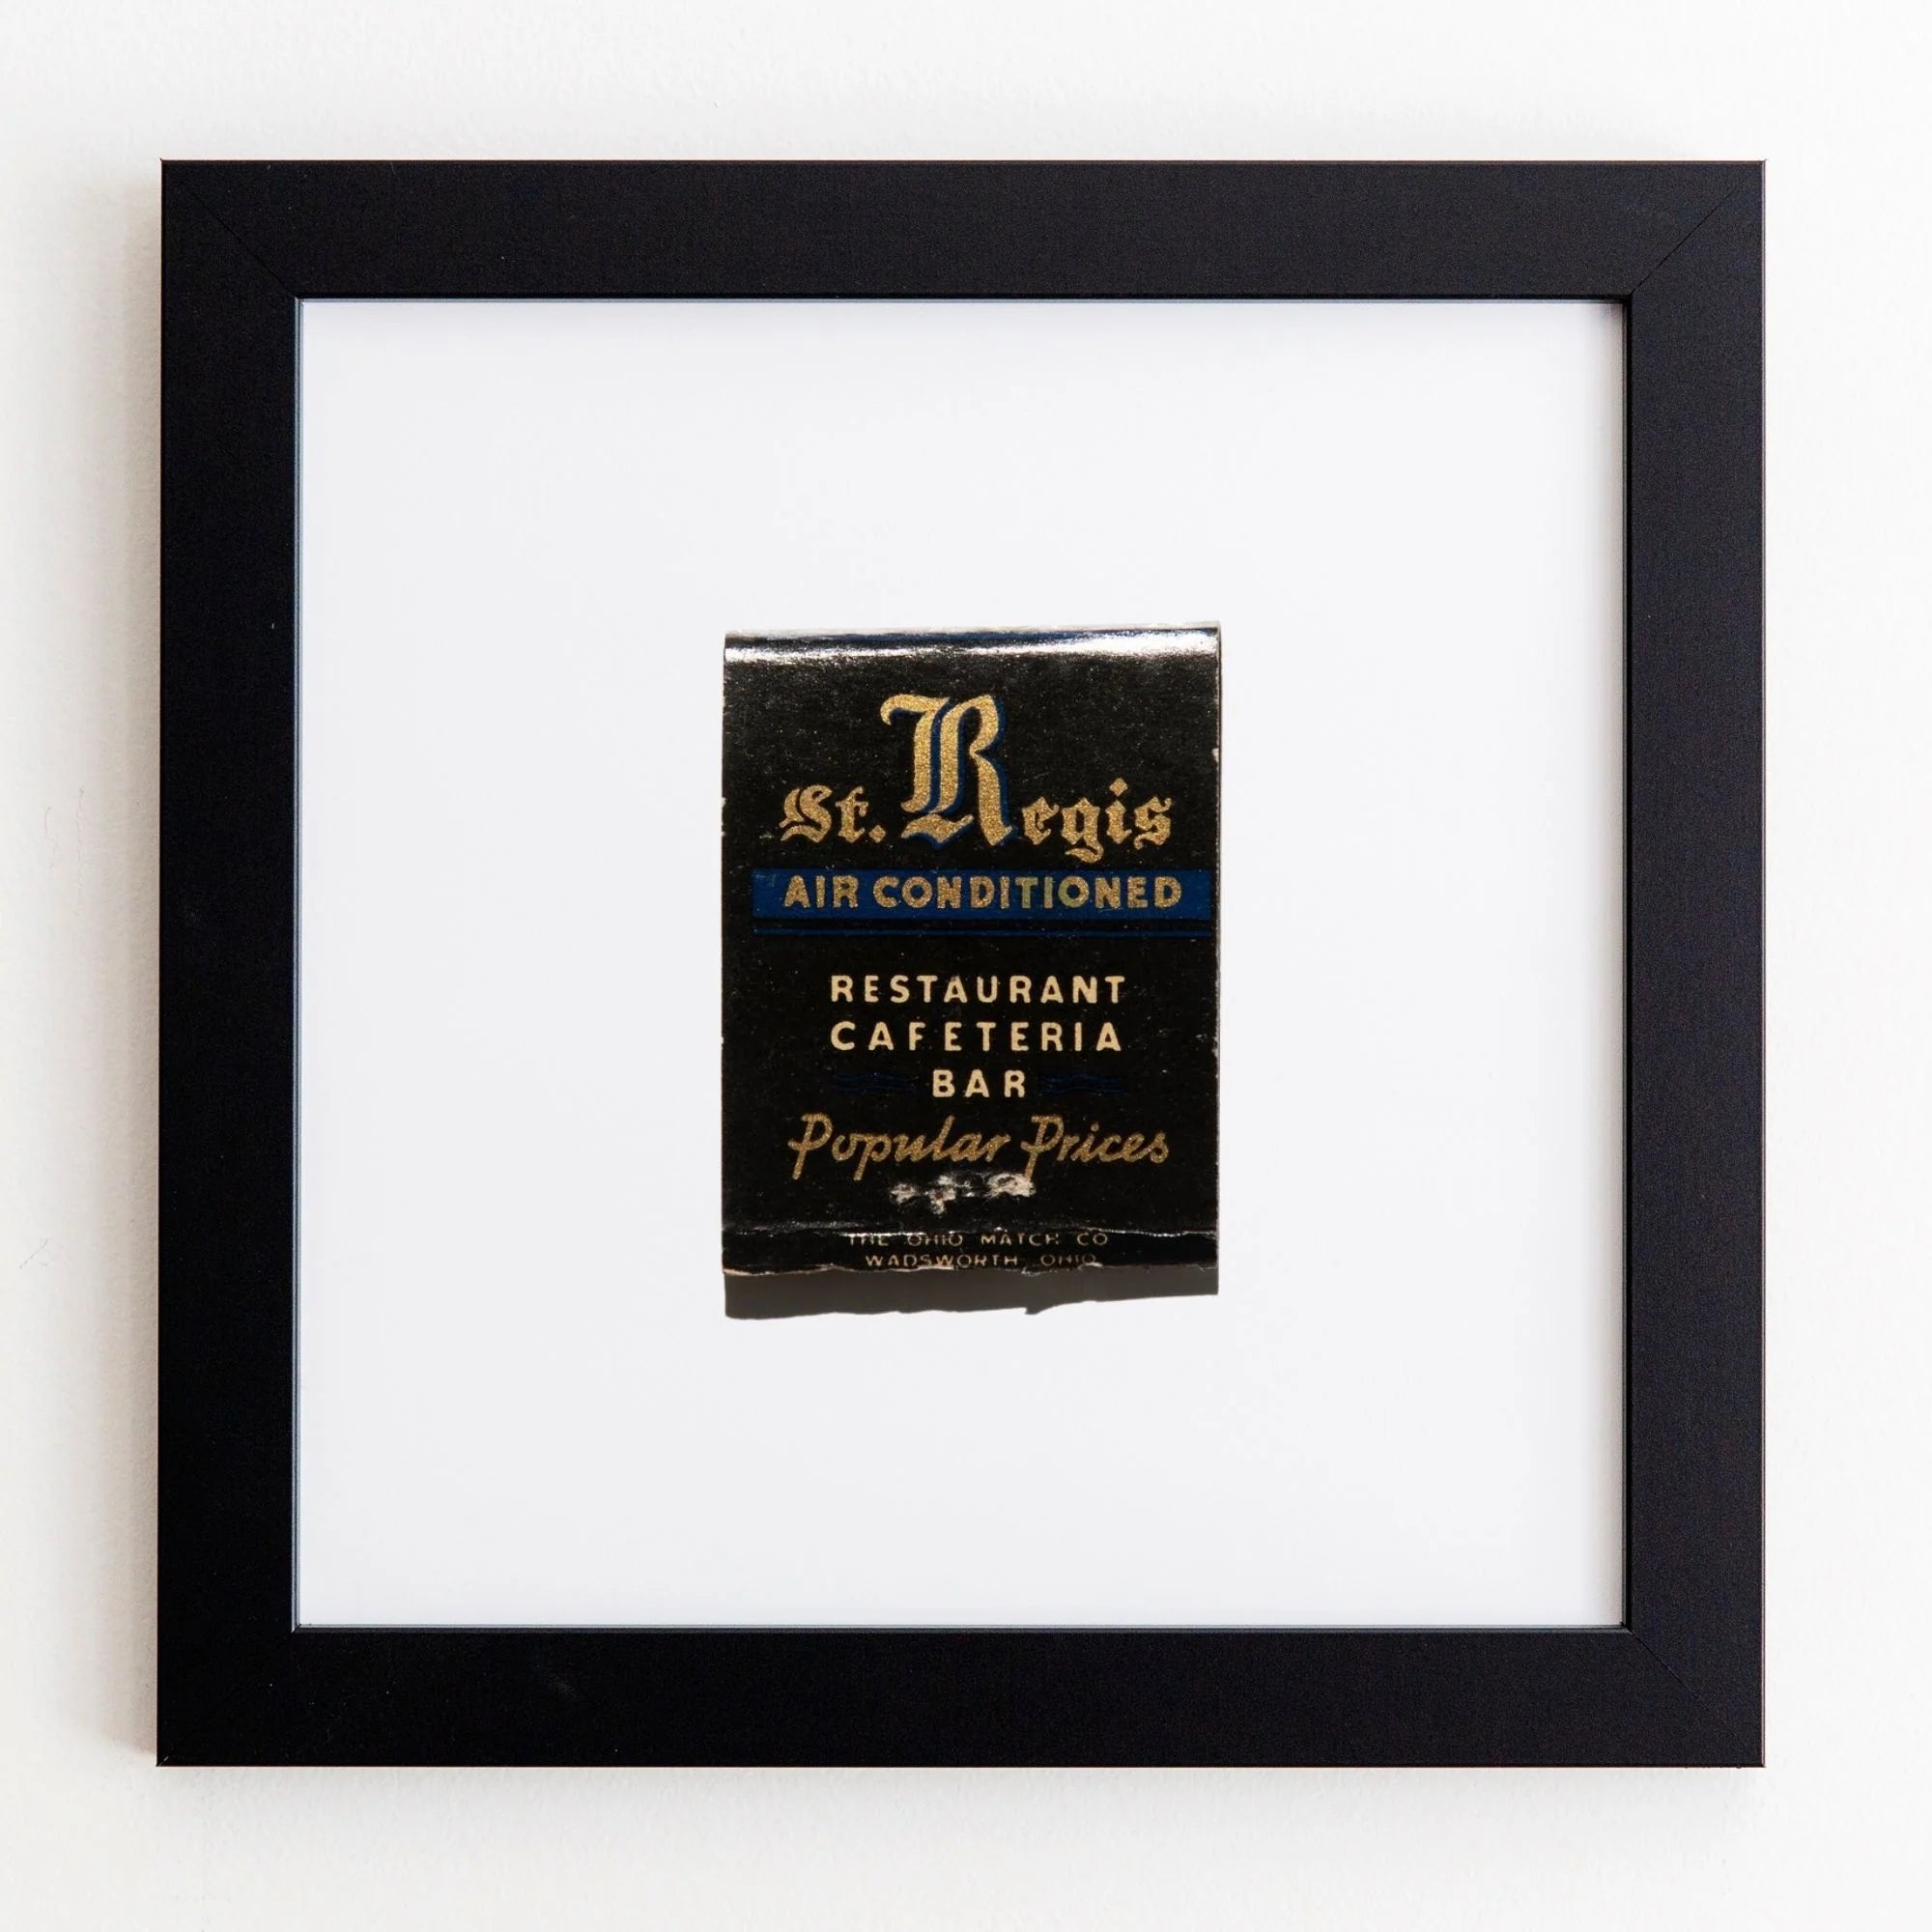 A framed vintage advertisement for St. Regis Restaurant showing that it&#39;s air-conditioned, with offerings like a cafeteria and bar at popular prices, displayed in an Art Square Black Frame by Match South on an acrylic white wall.